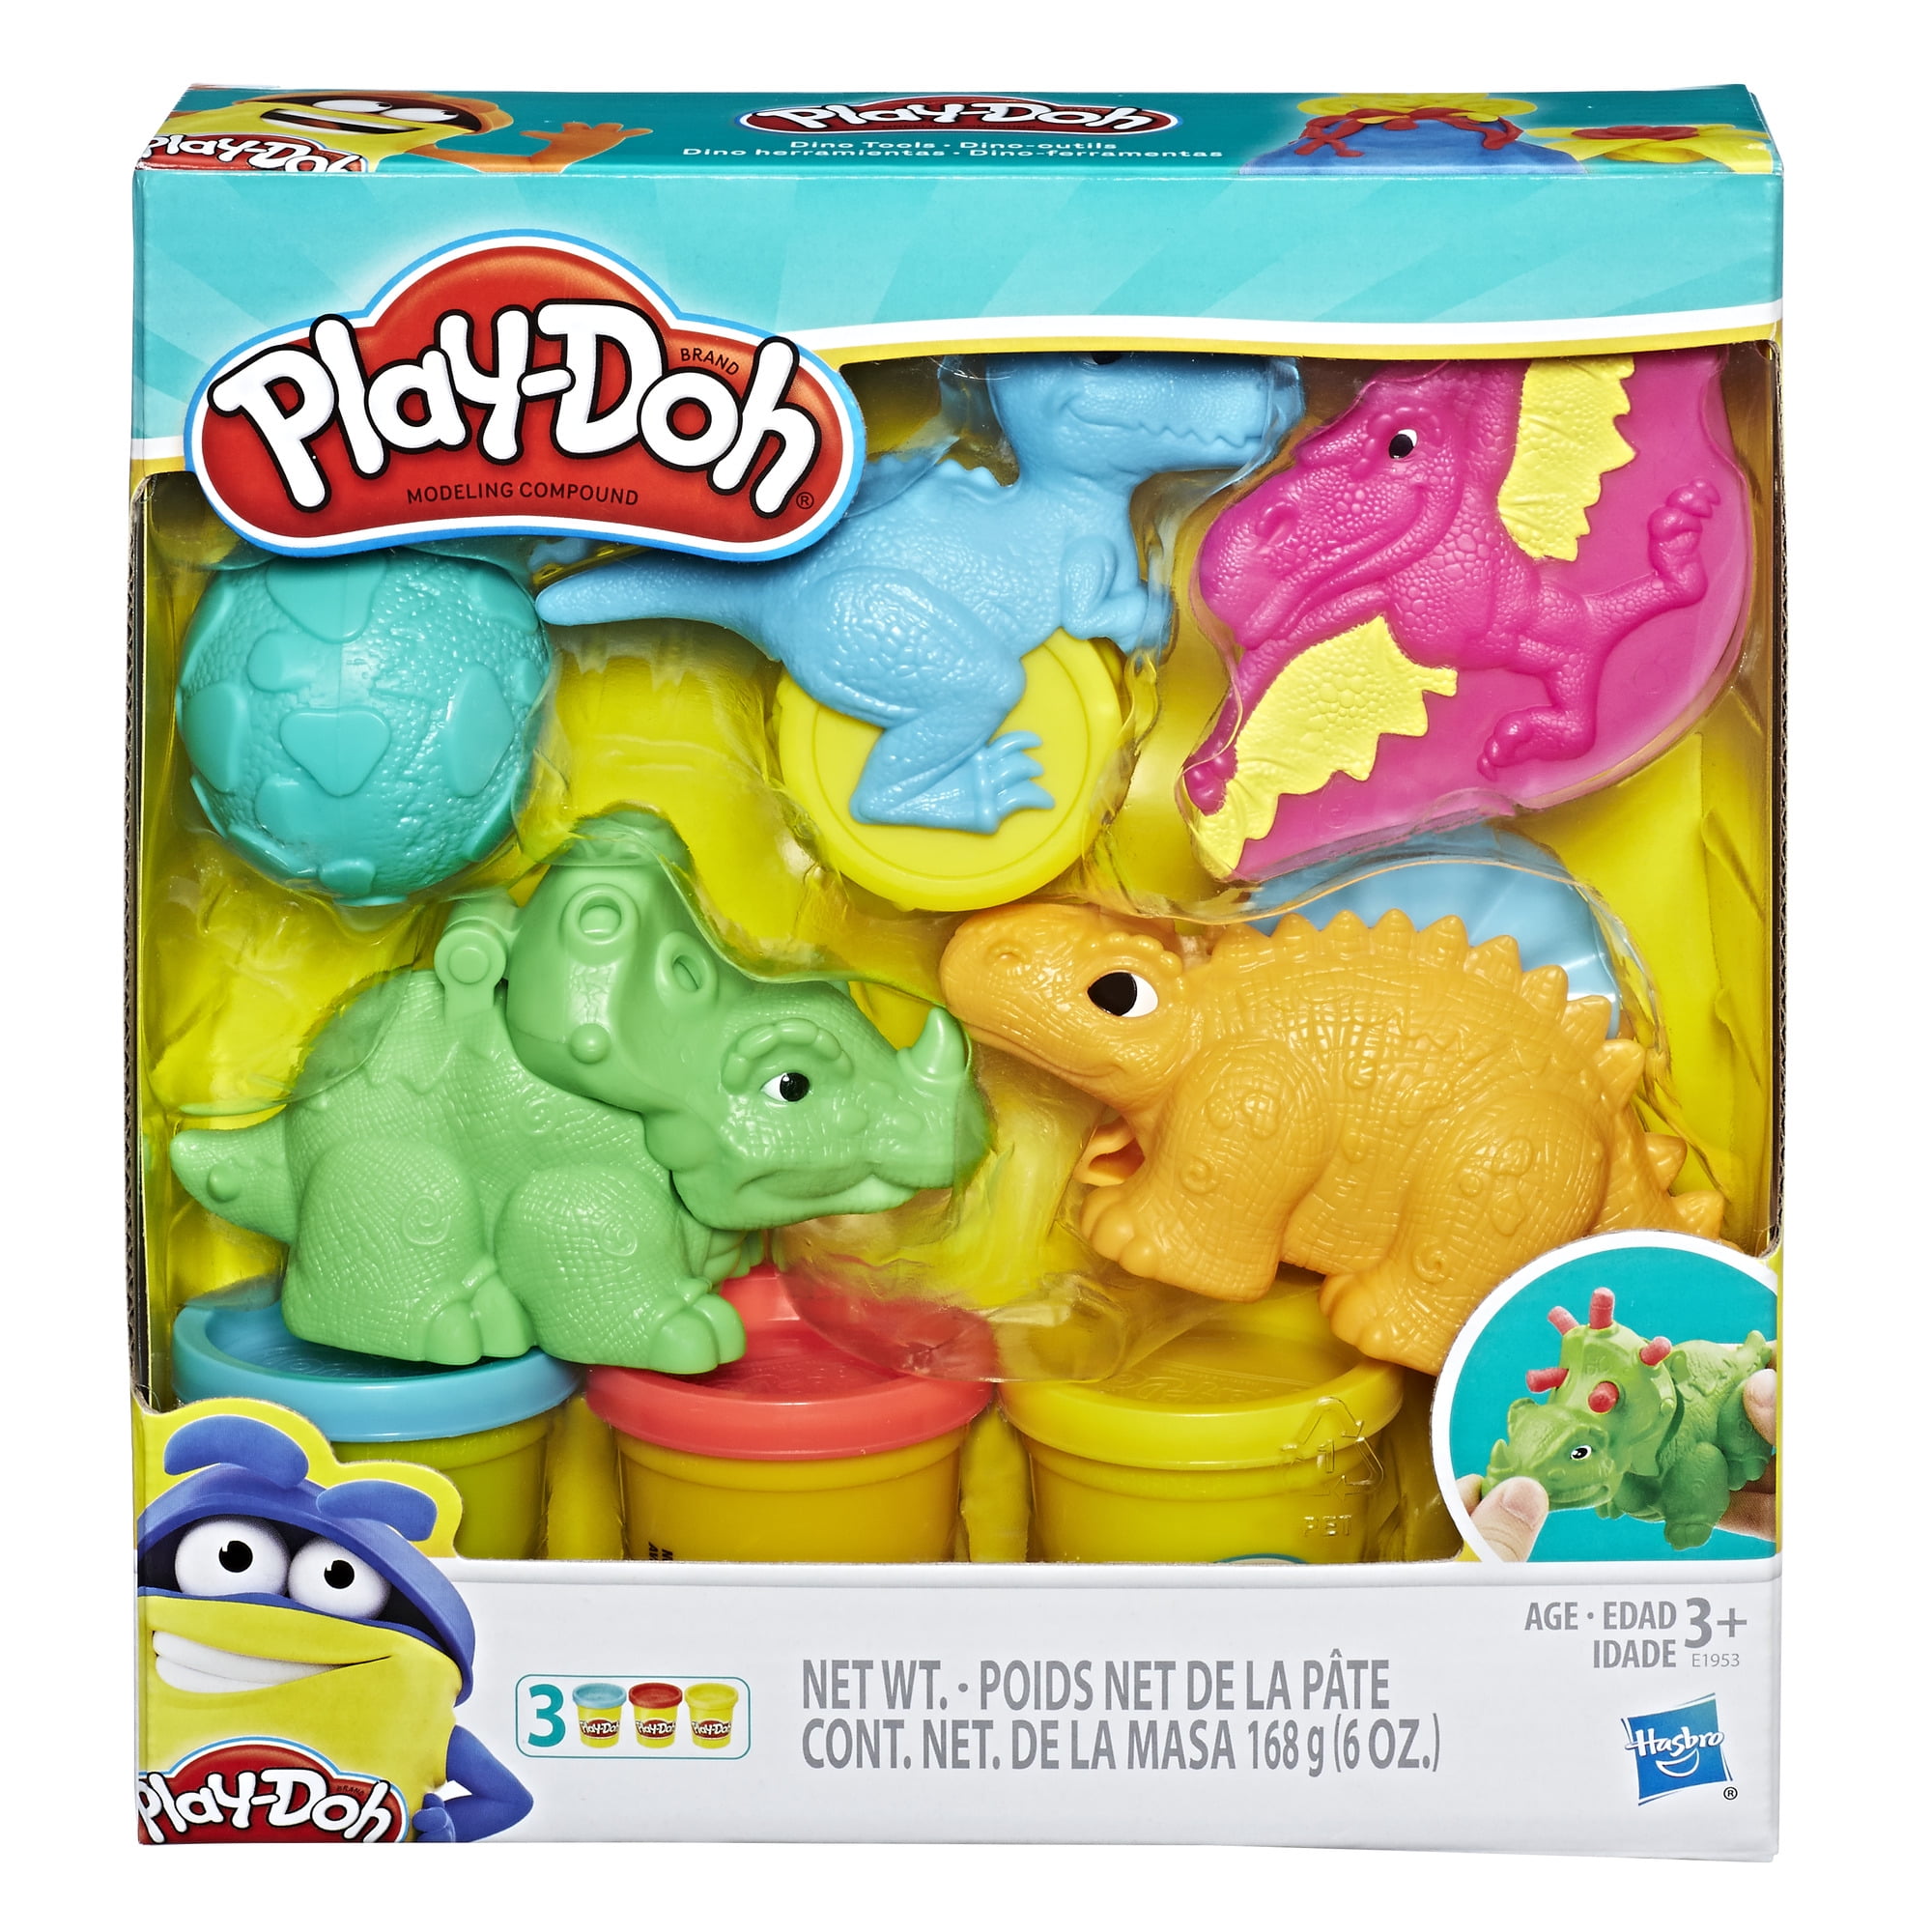 Ages 3+ Play-Doh Noodle Makin' Mania inc 5 Tubs of Dough Kitchen Creations 